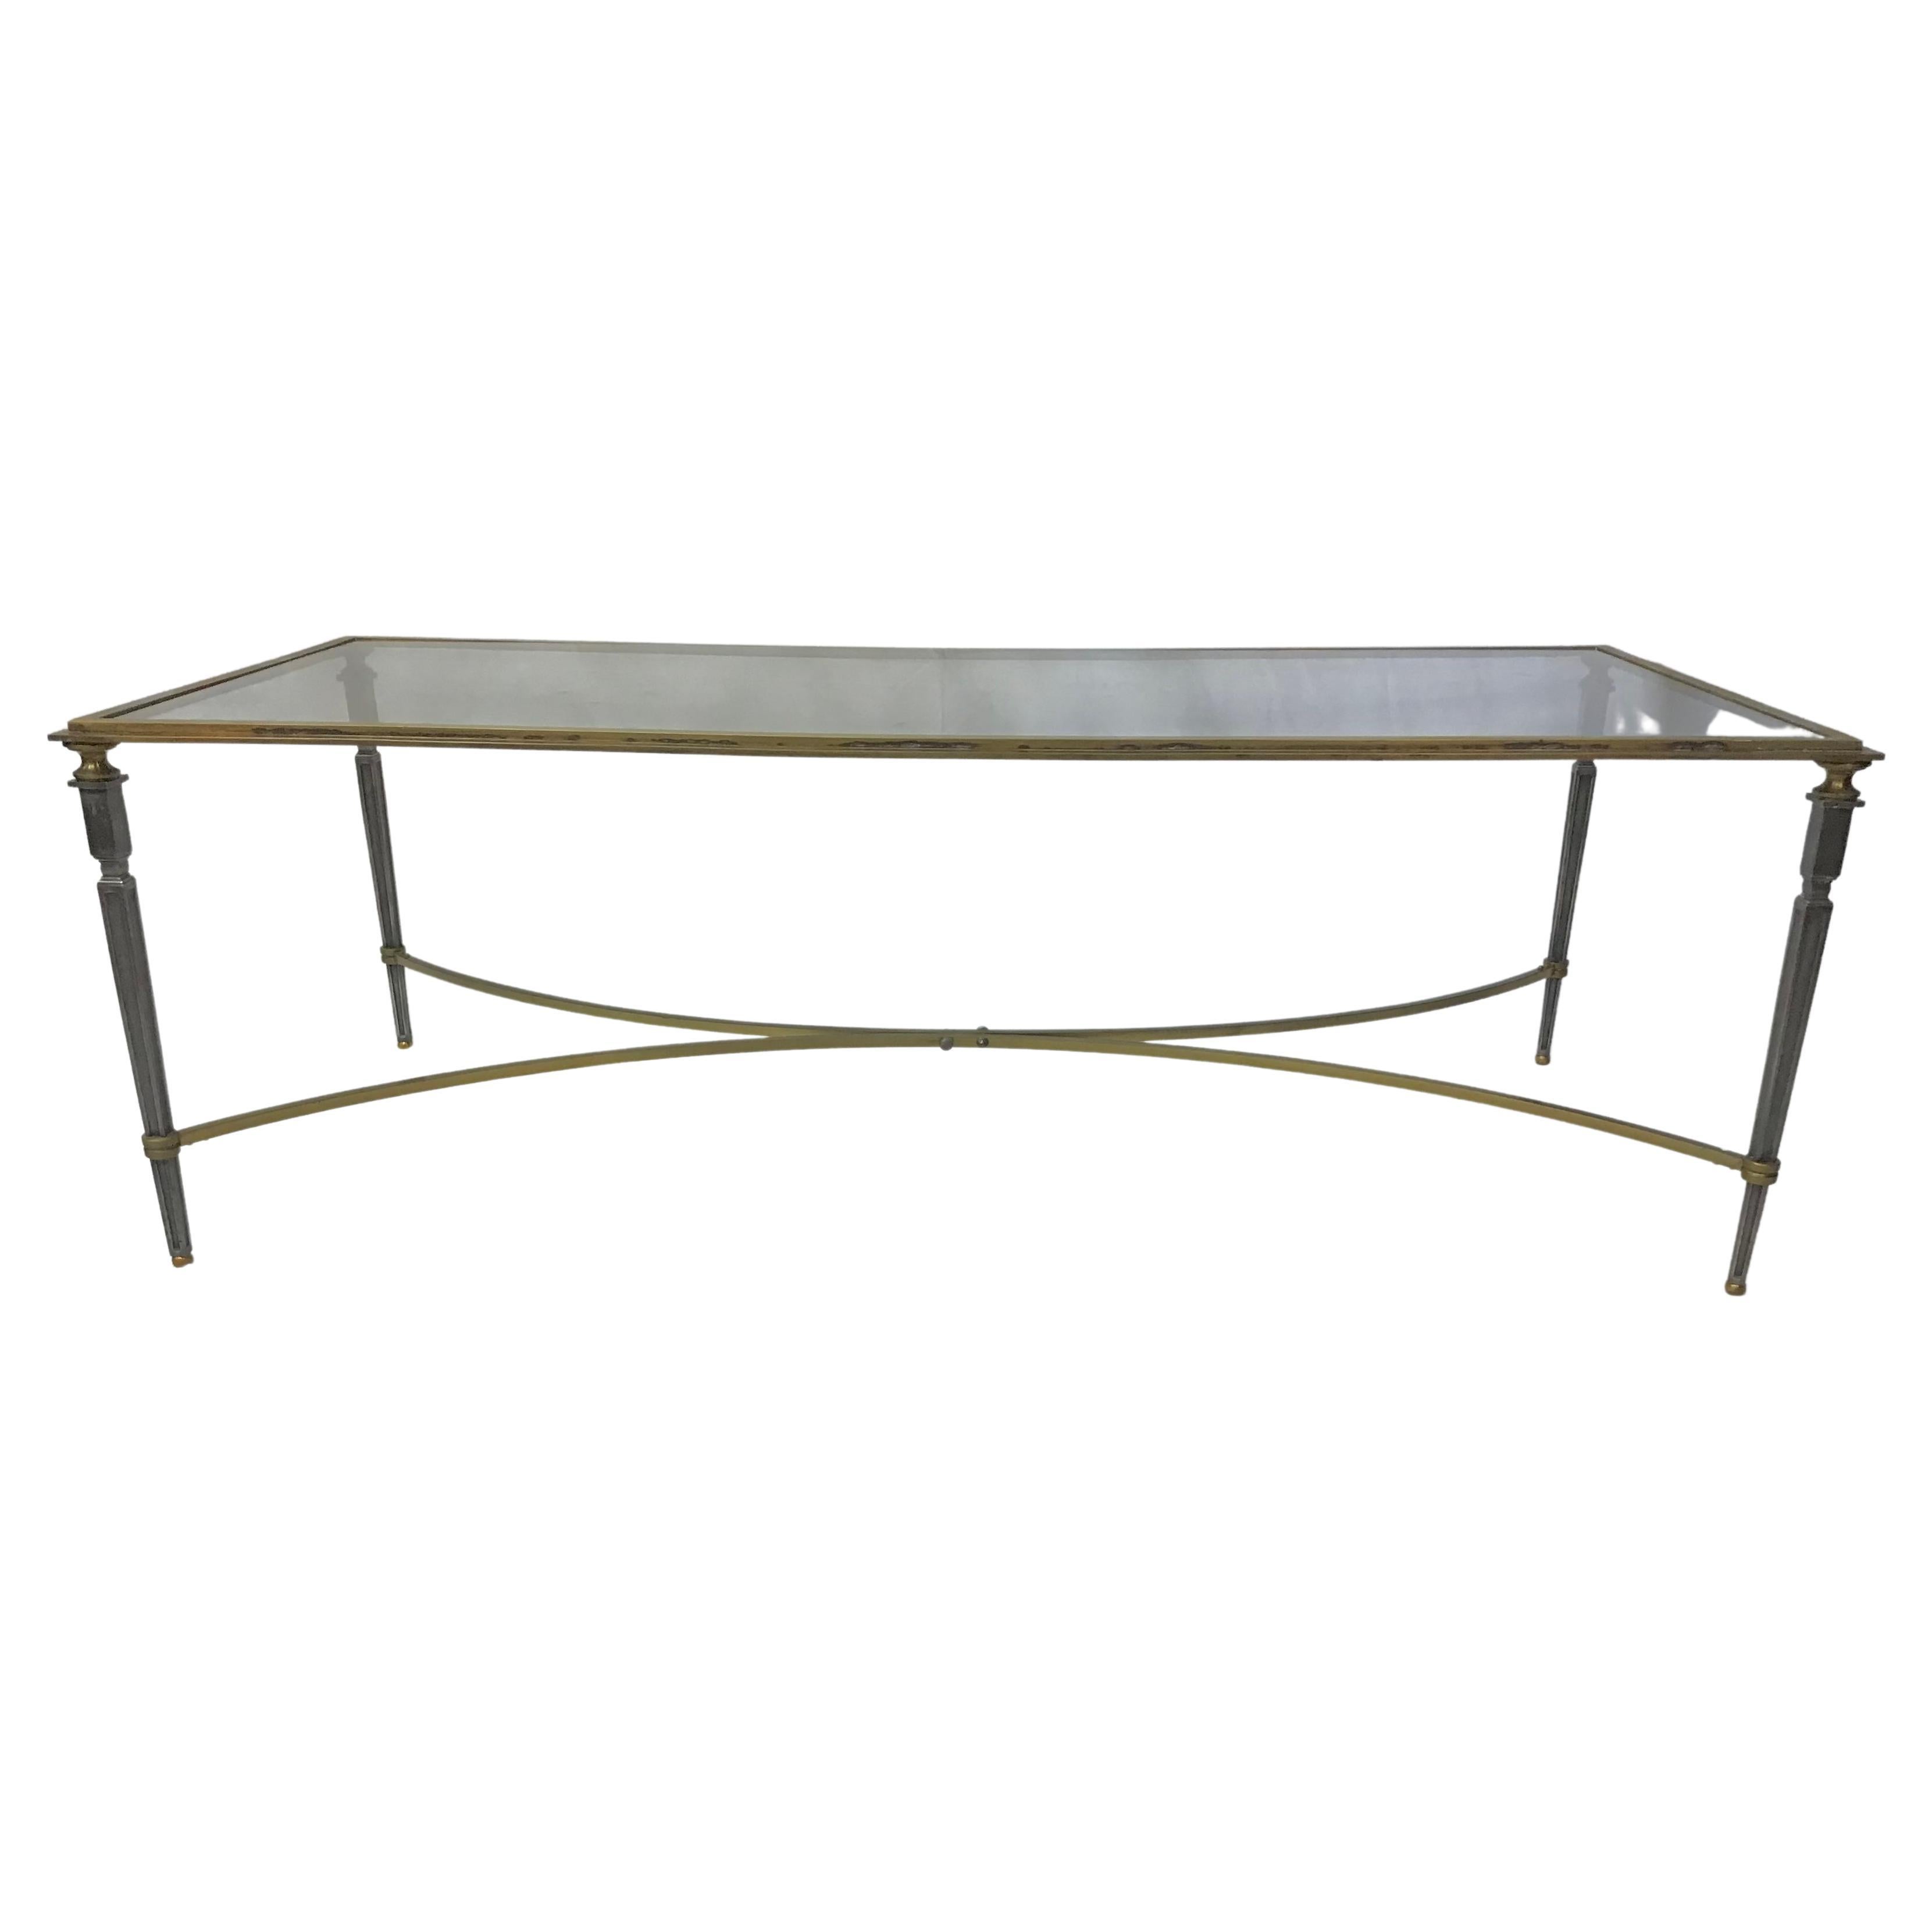 Brass and Steel Jansen Style Coffee Table